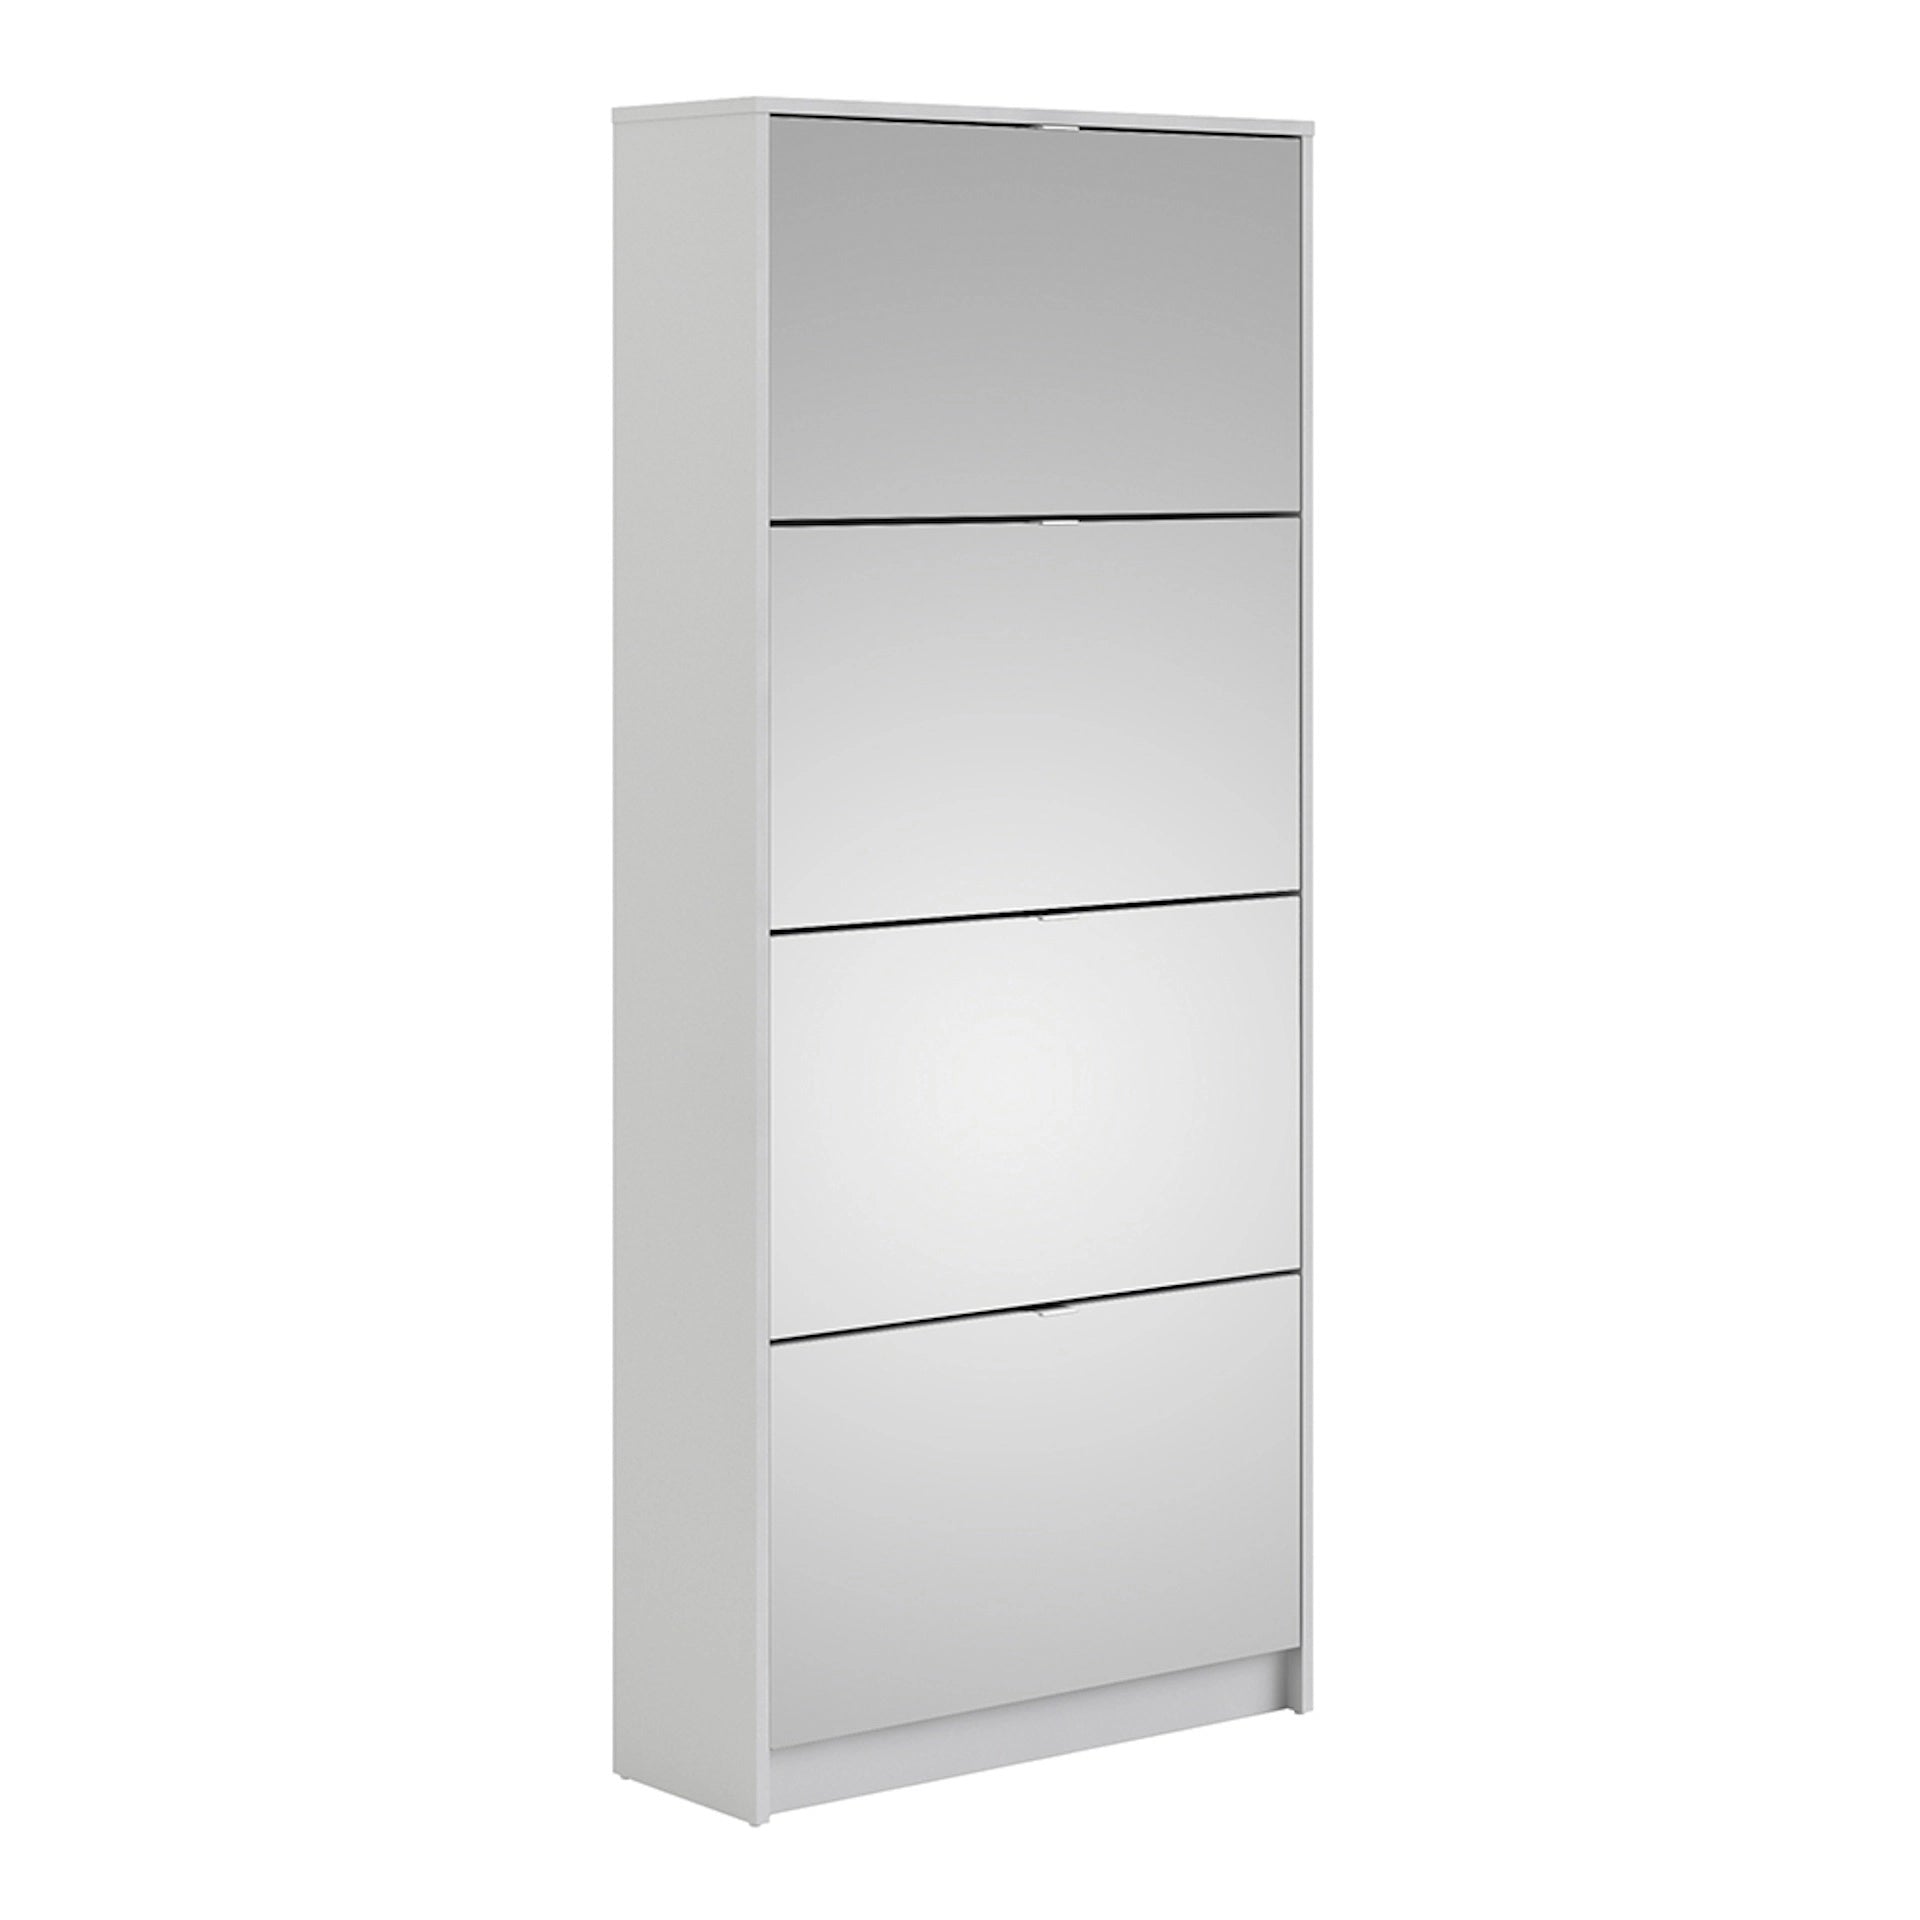 Furniture To Go Shoes Shoe Cabinet W. 4 Mirror Tilting Doors & 2 Layers in White